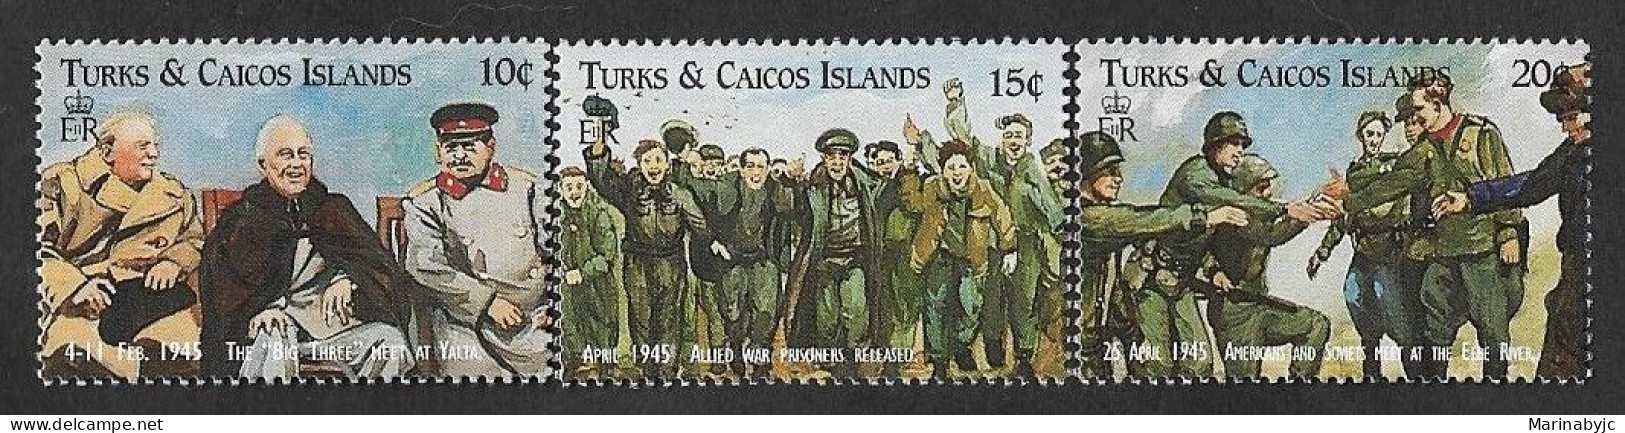 SE)1995 TURKS AND CAICOS ISLANDS  50TH ANNIVERSARY OF THE END OF THE SECOND WORLD WAR IN EUROPE, SOLDIERS CELEBRATING, 3 - Turcas Y Caicos